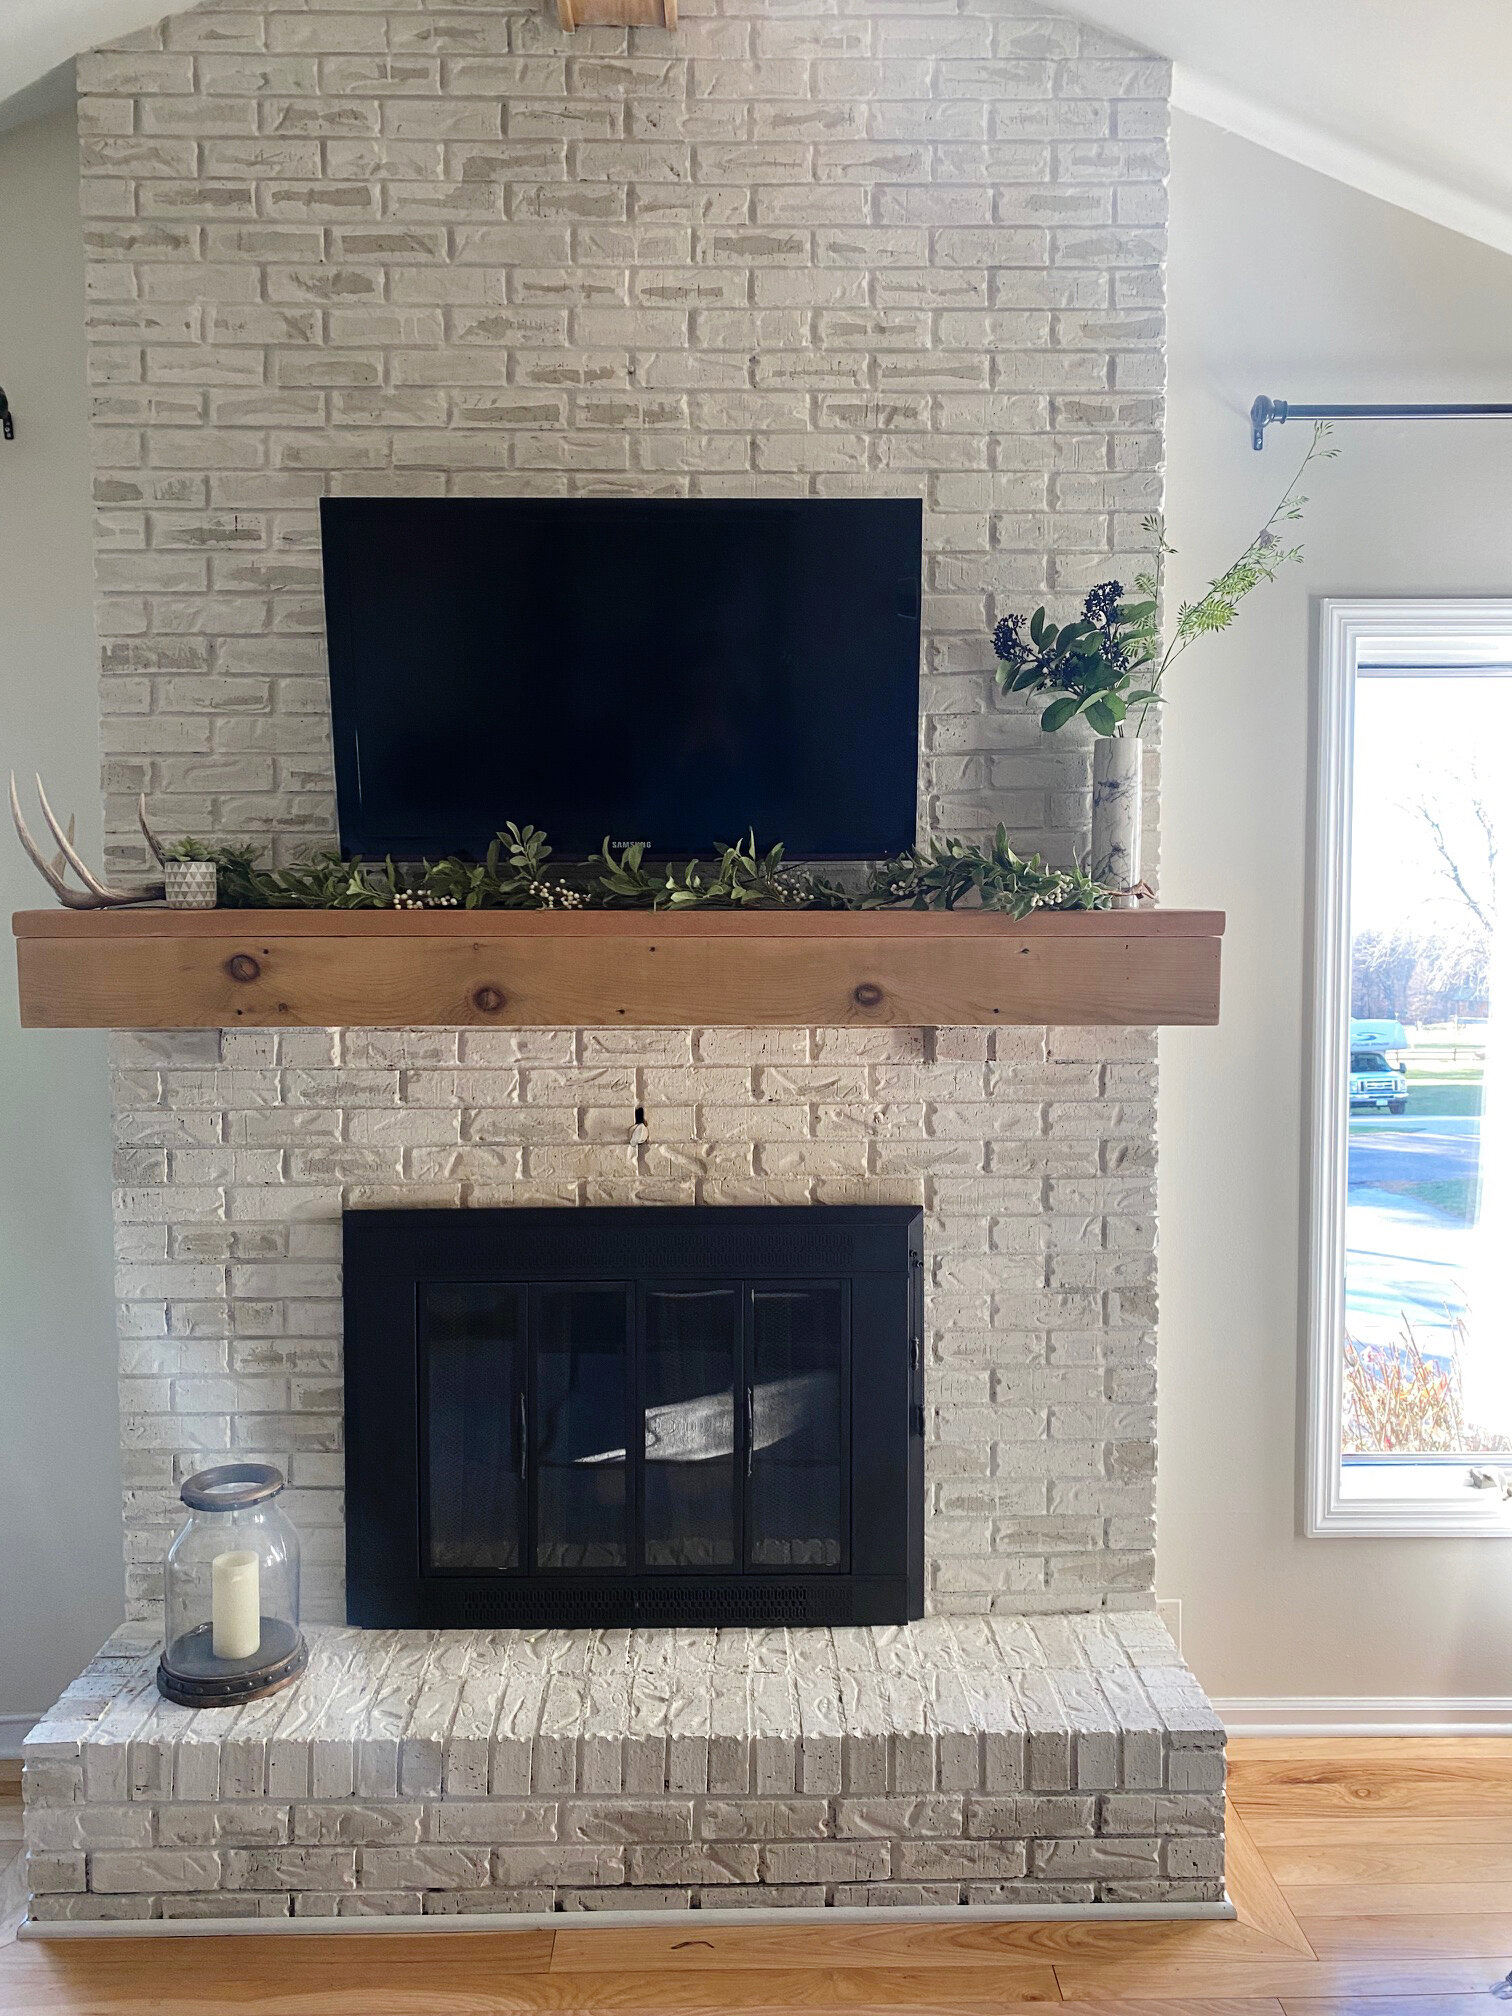 My Painted Brick Fireplace Diy Tutorial, How To Make A Red Brick Fireplace Look Better